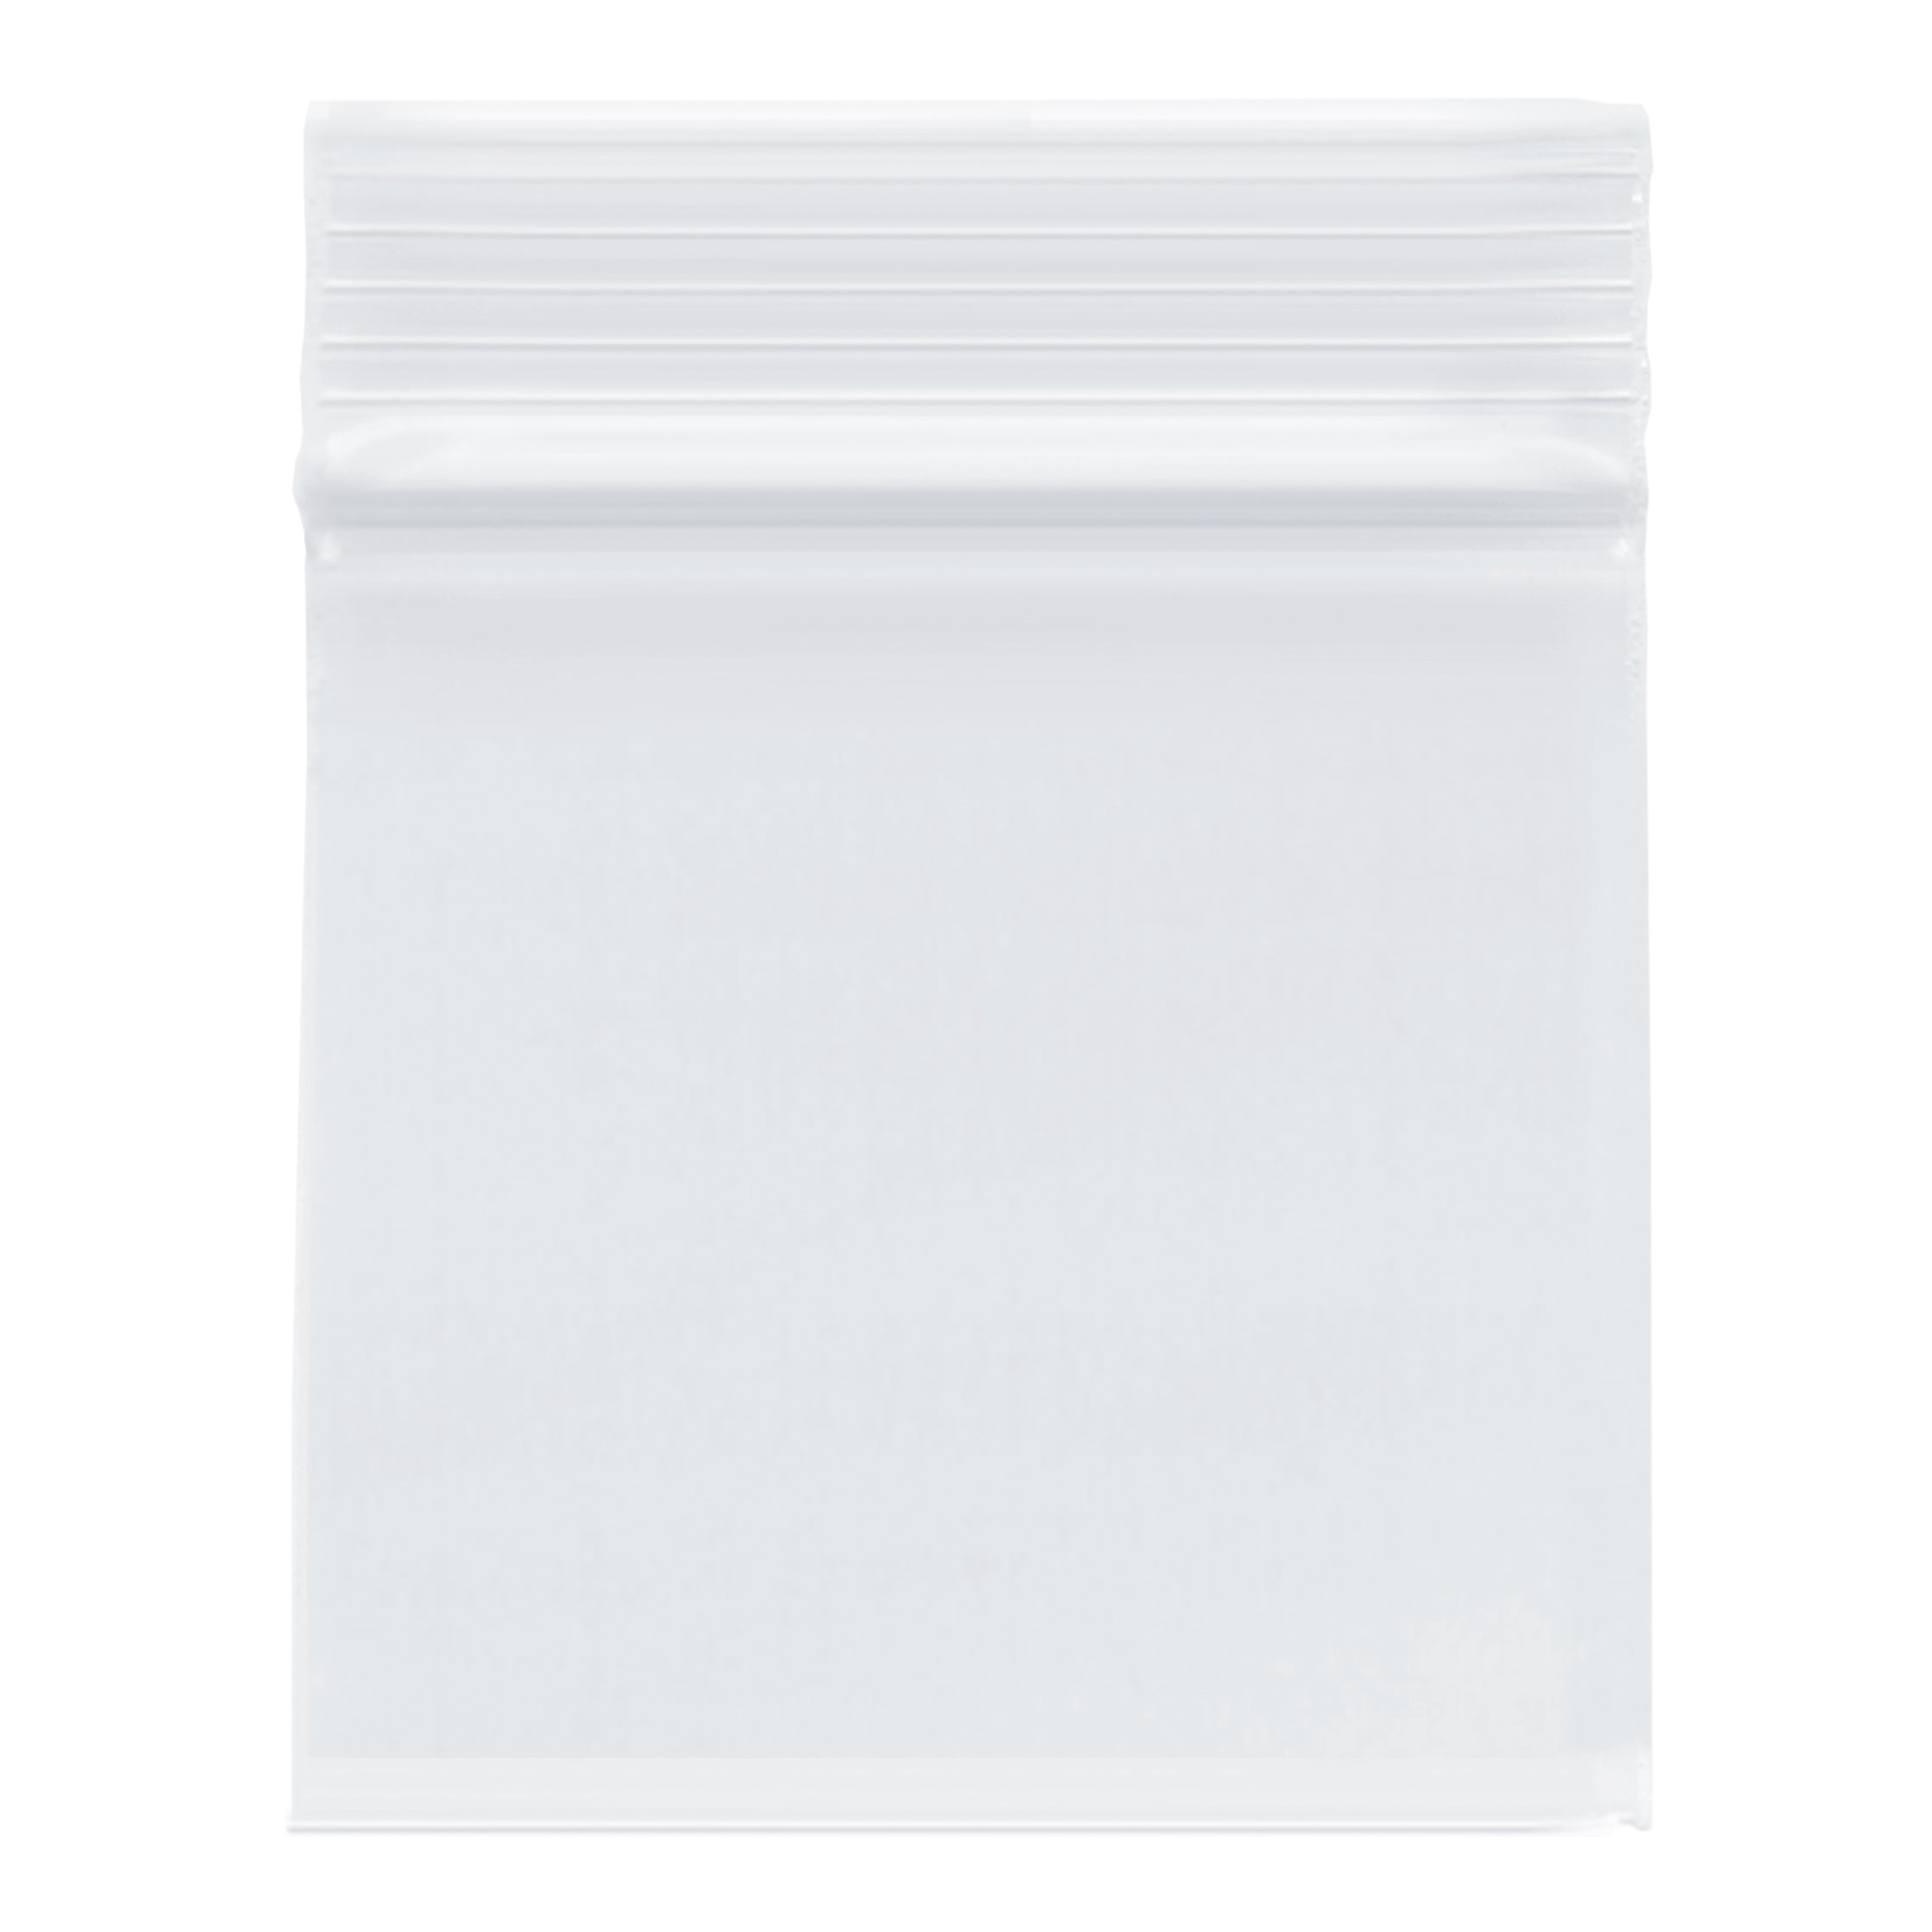 Water Proof Heavy Duty 4mil 100pcs Clear Top Open Flat Treat Bags with 6 sizes 